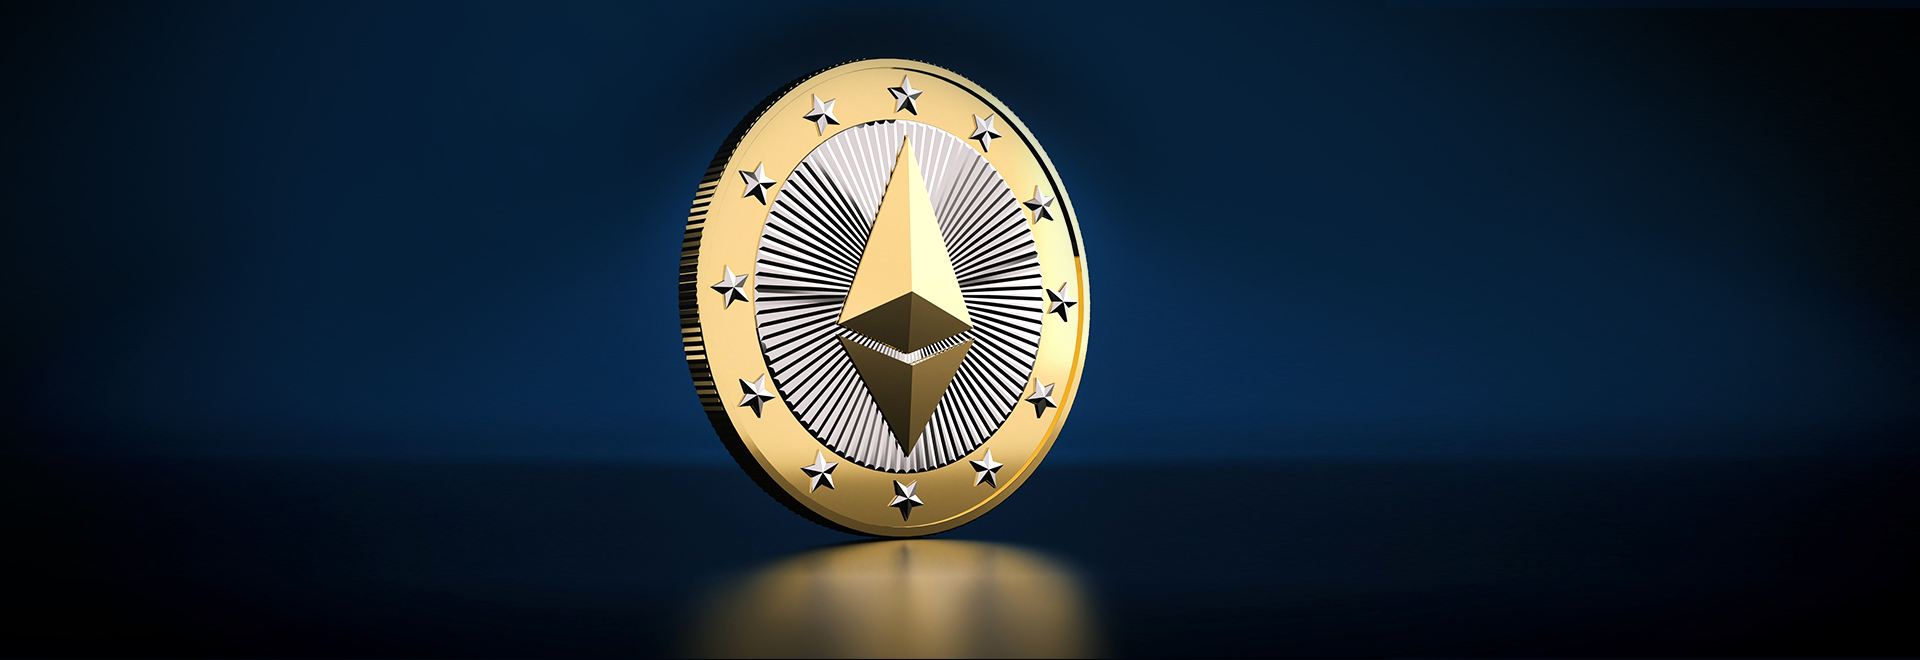 PayPal recently introduced its Ethereum-based stablecoin